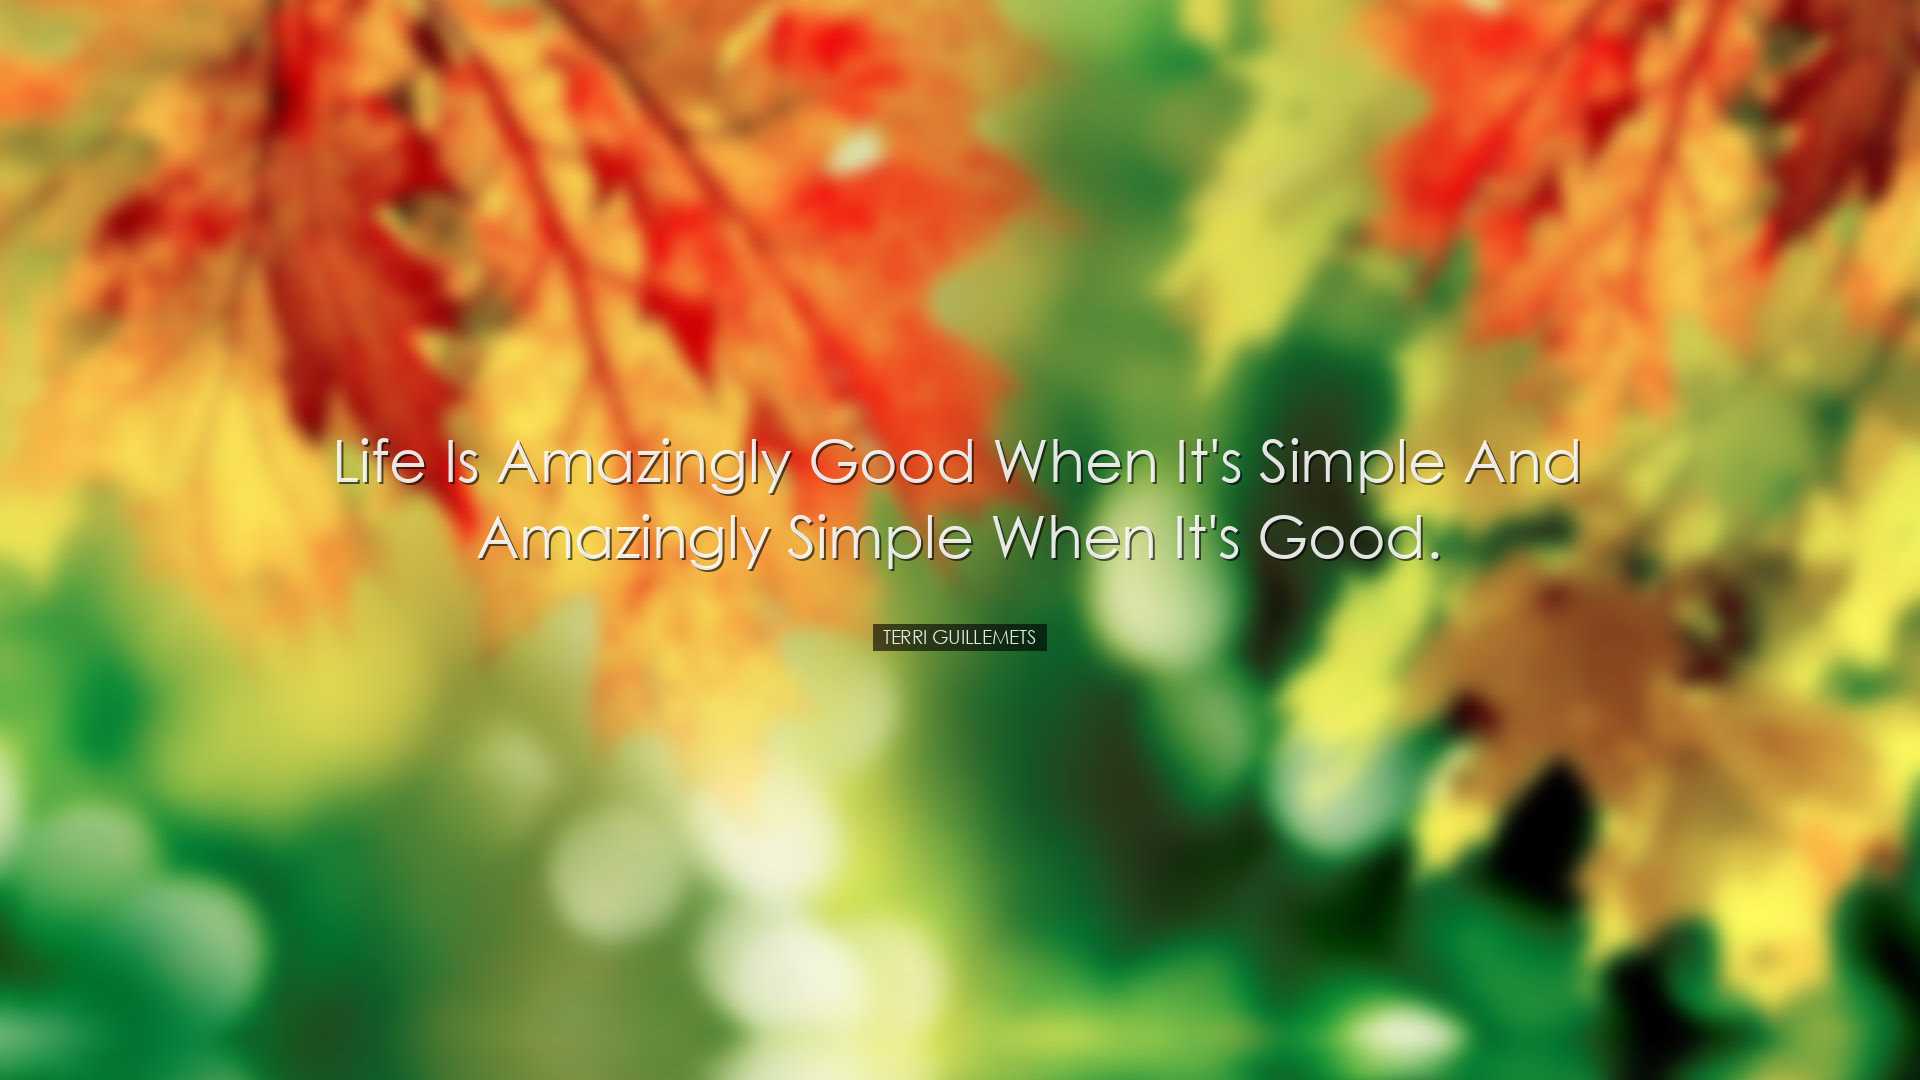 Life is amazingly good when it's simple and amazingly simple when